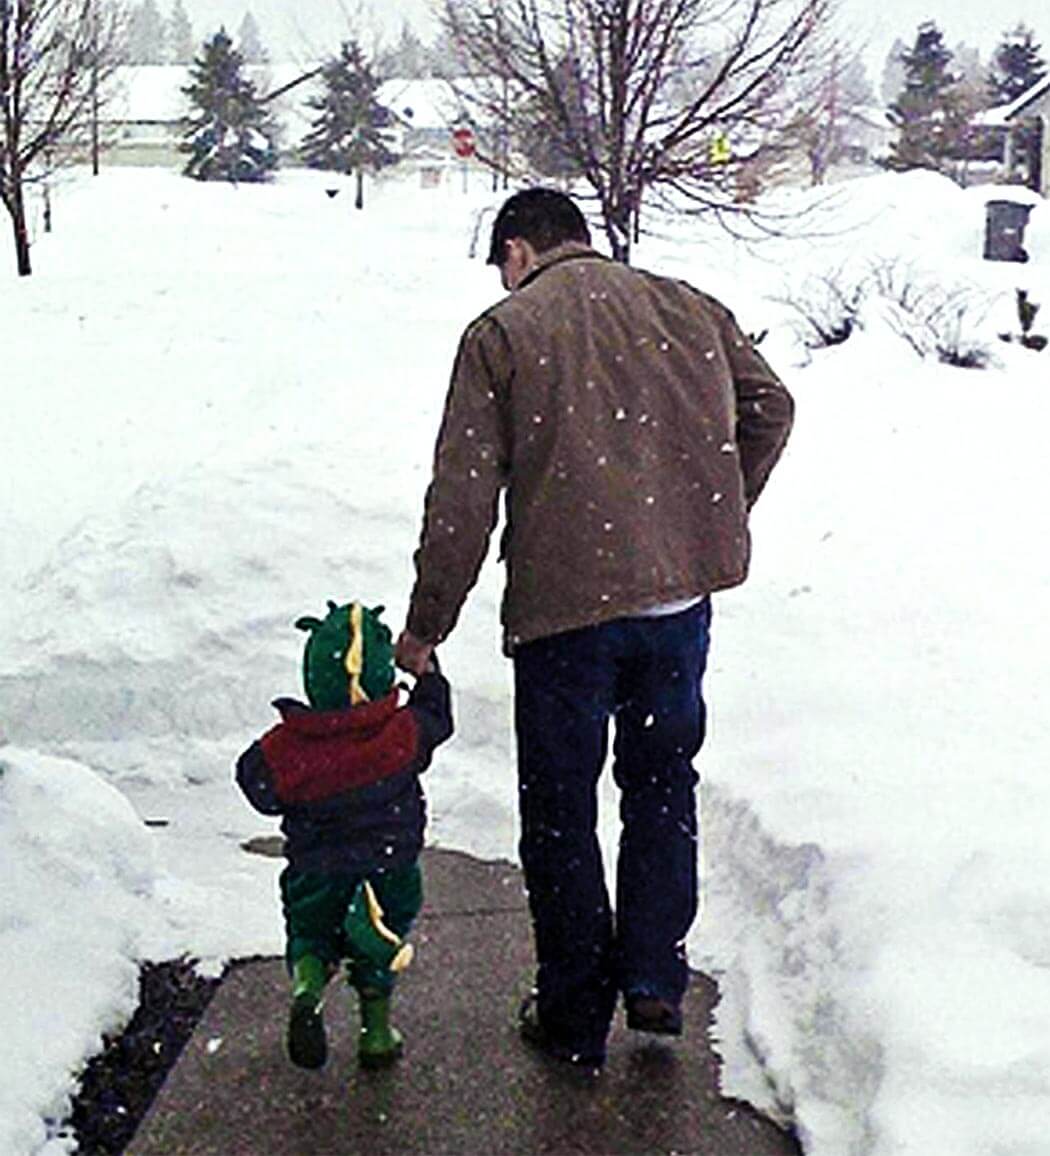 child and adult walking in the snow